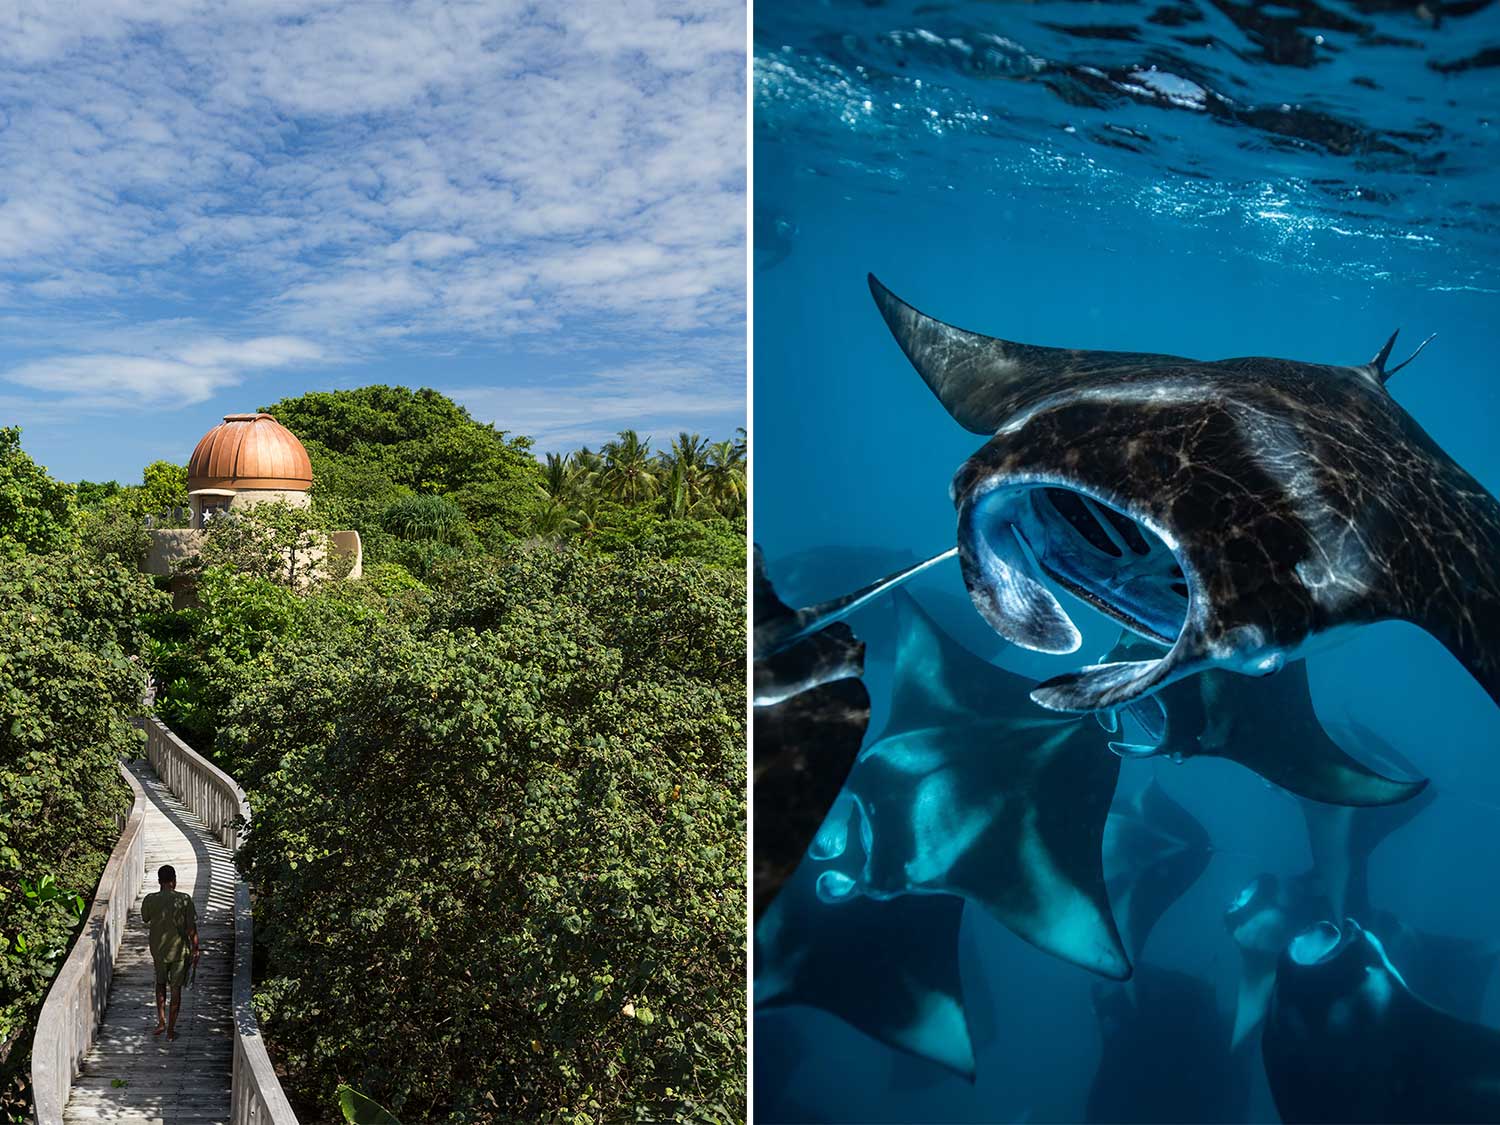 Side-by-side images of a temple of a walkway and an underwater image of a school of manta rays.